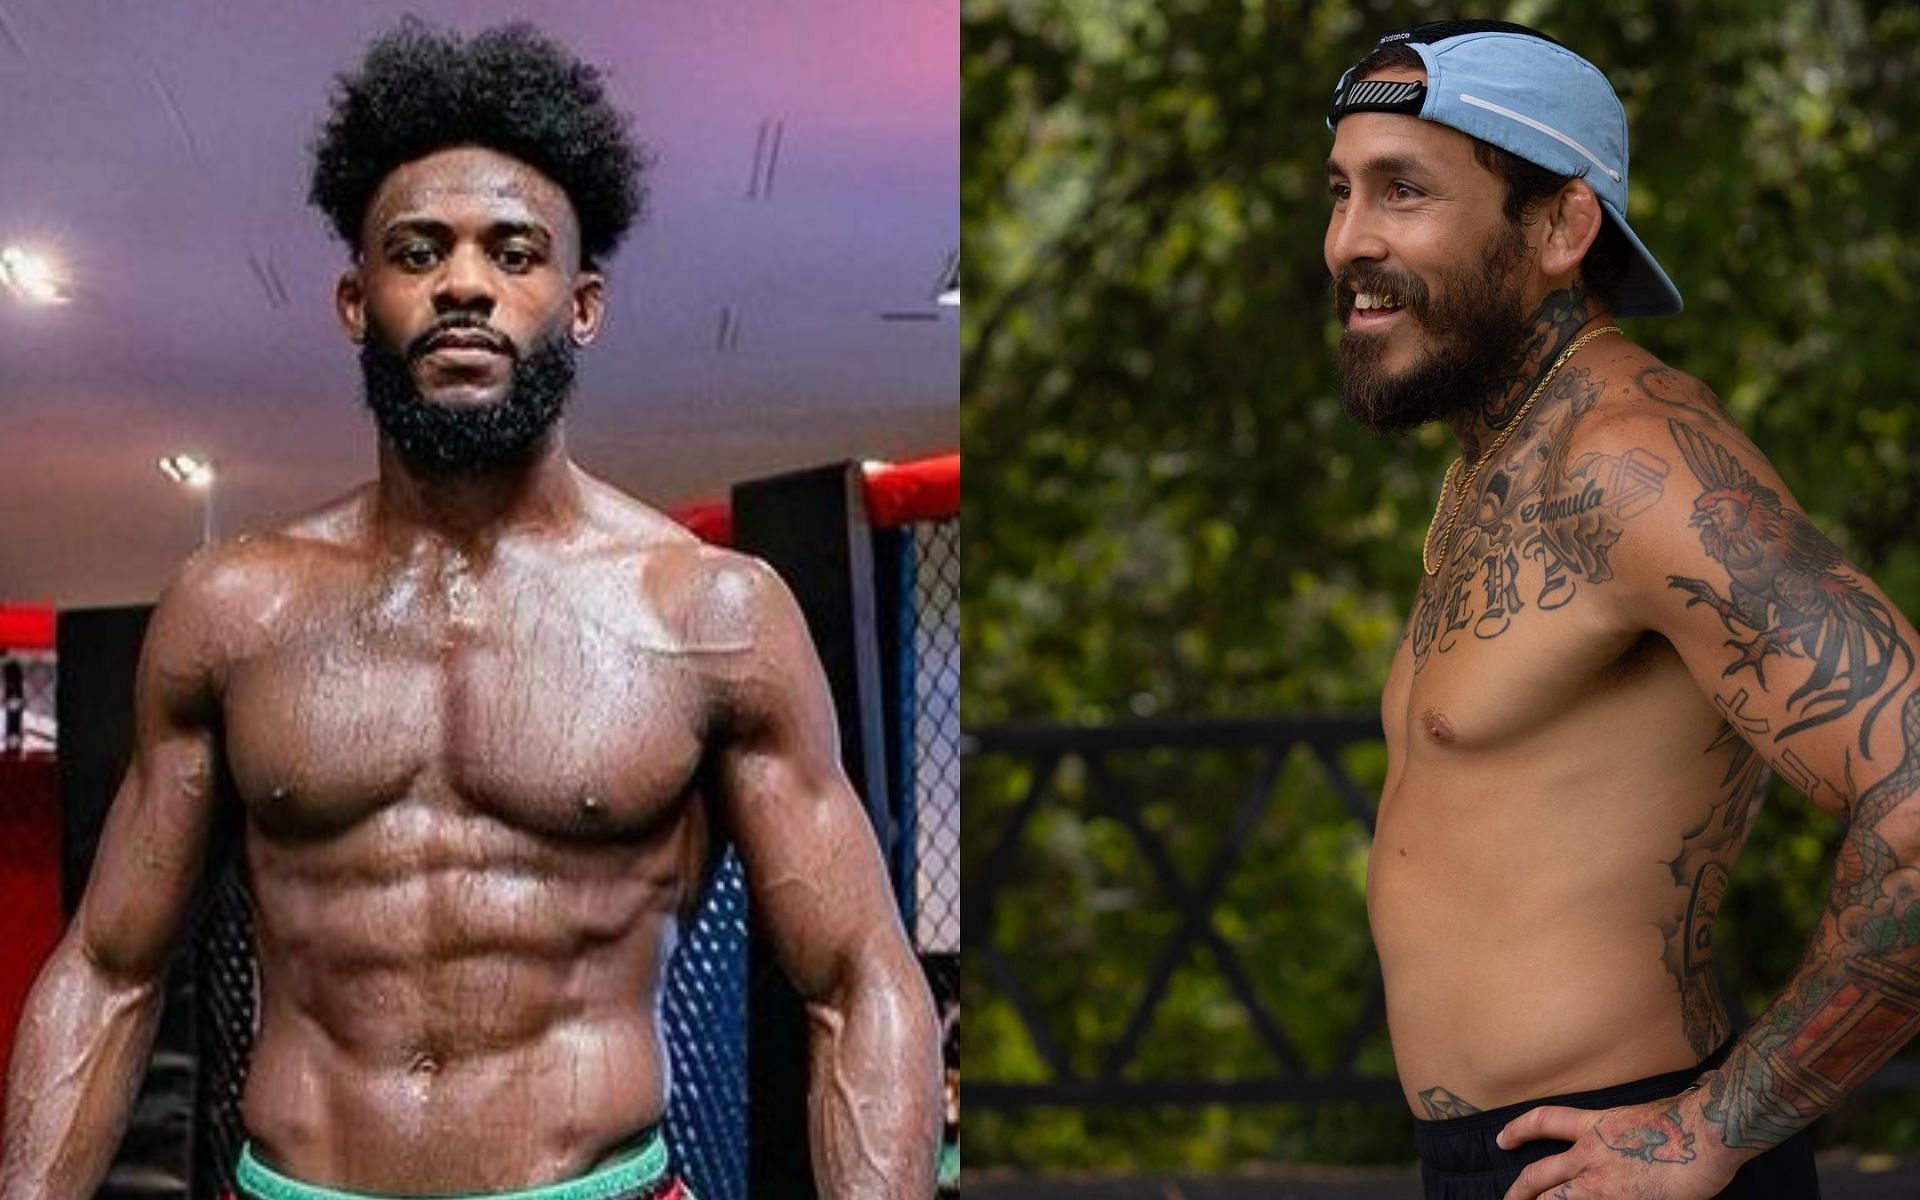 Marlon Vera (right) blasts Aljamain Sterling (left) for chasing money [Images courtesy @chitoveraufc and @funkmastermma on Instagram]